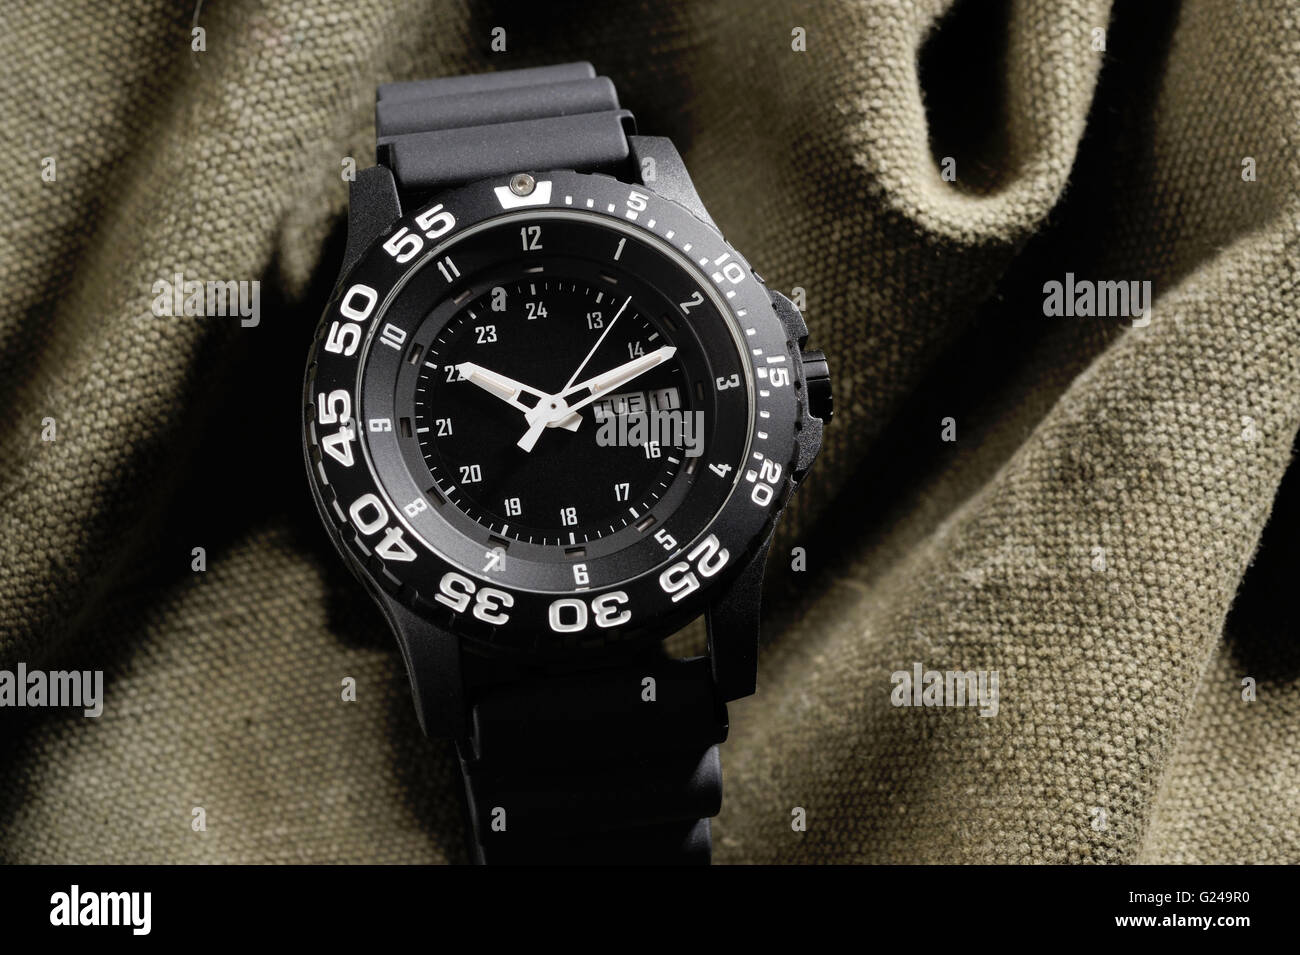 Tritium military watch on camouflage cloth Stock Photo